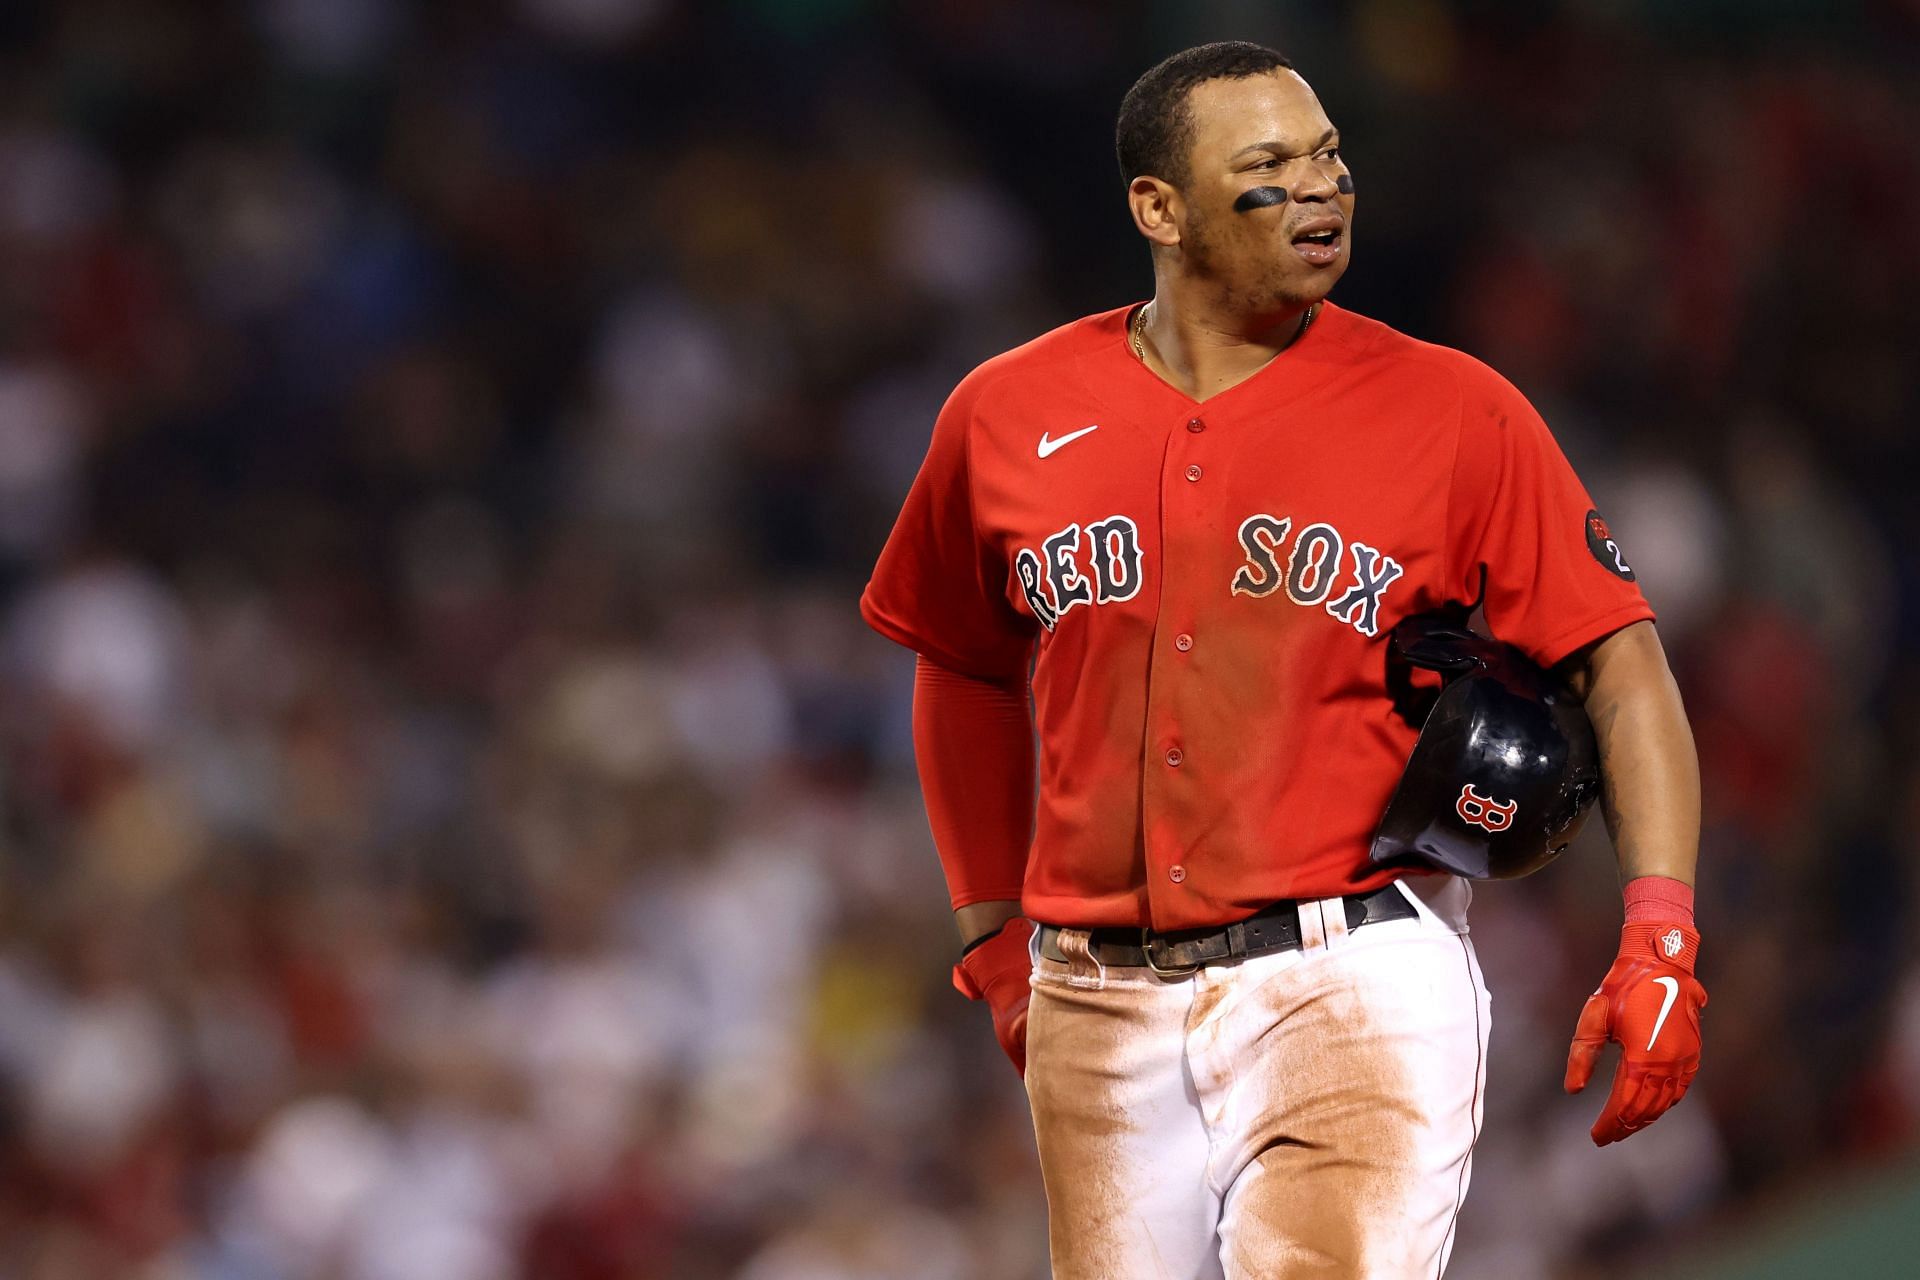 The Red Sox are now four games under .500